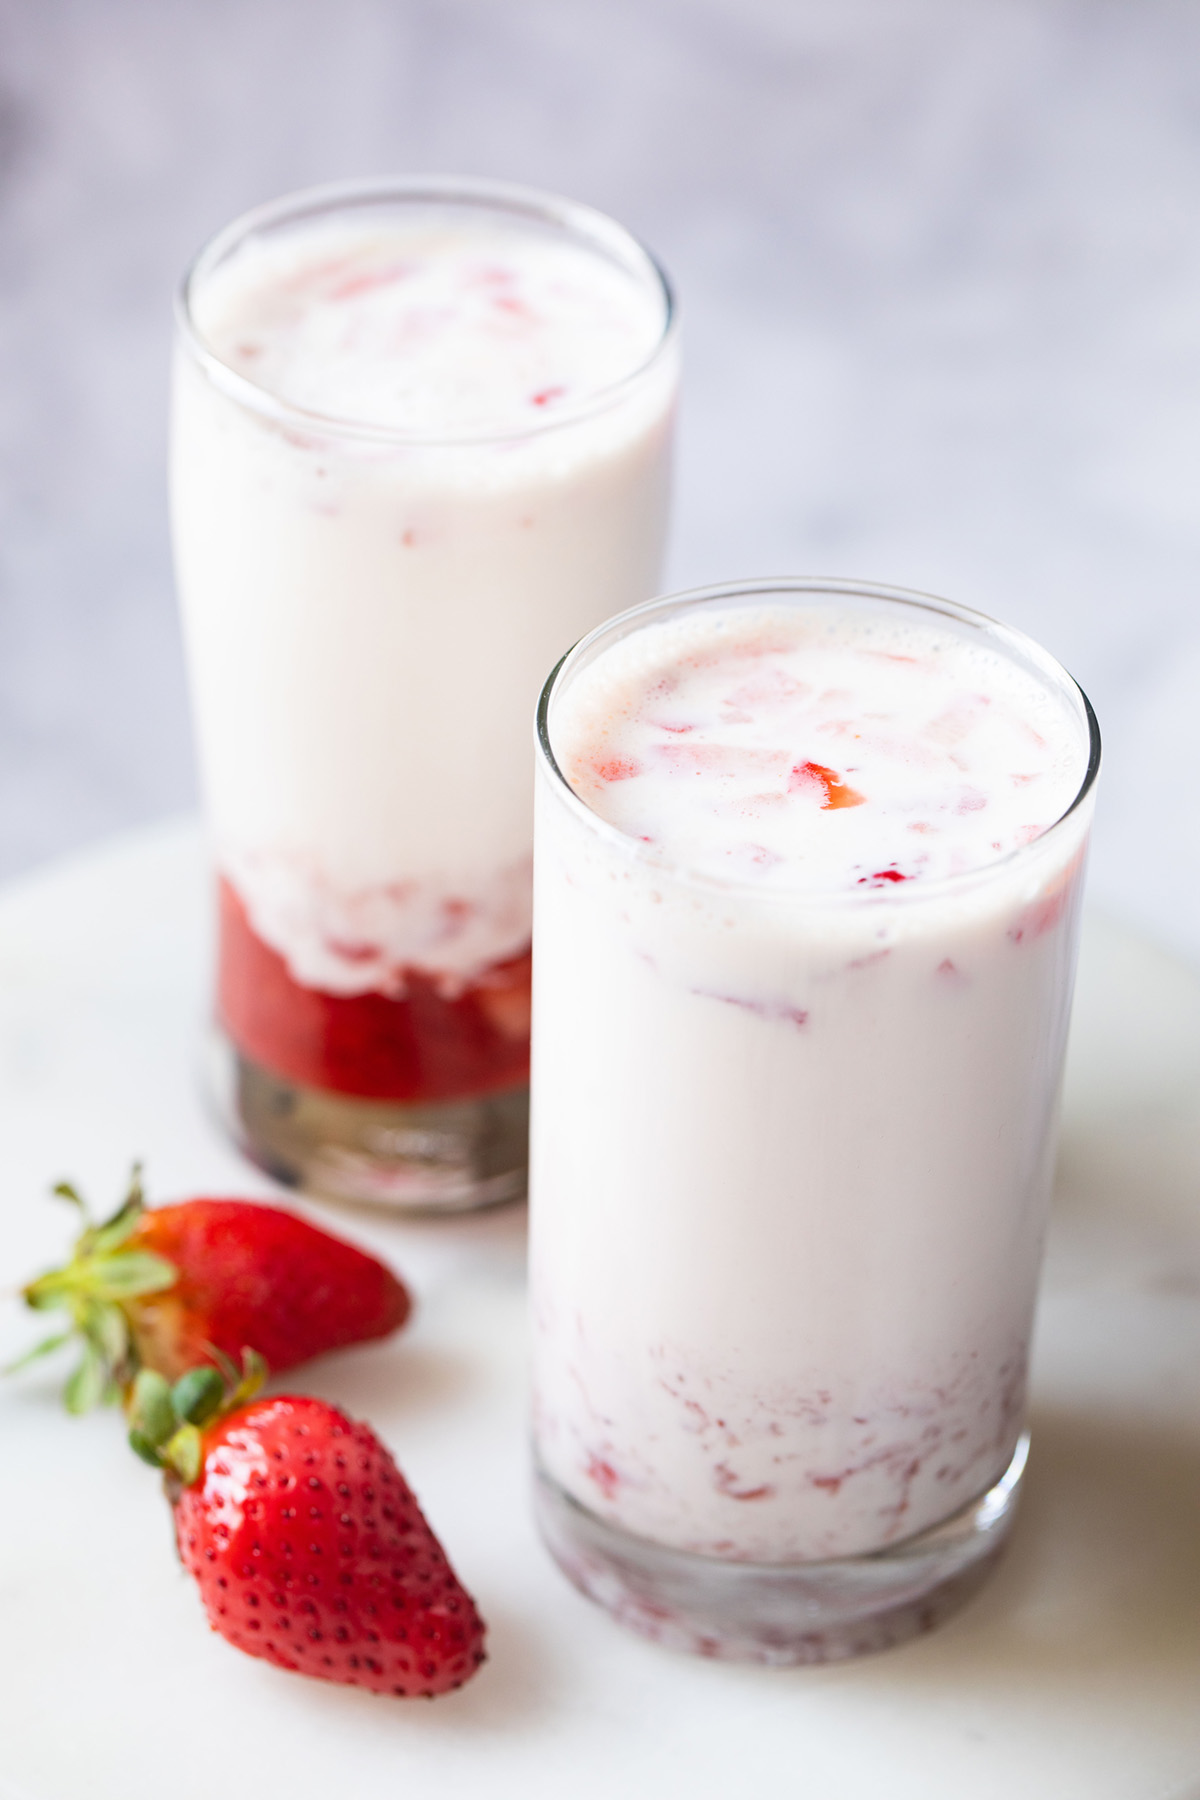 two collins glasses with homemade strawberry milk and two fresh strawberries on a white surface